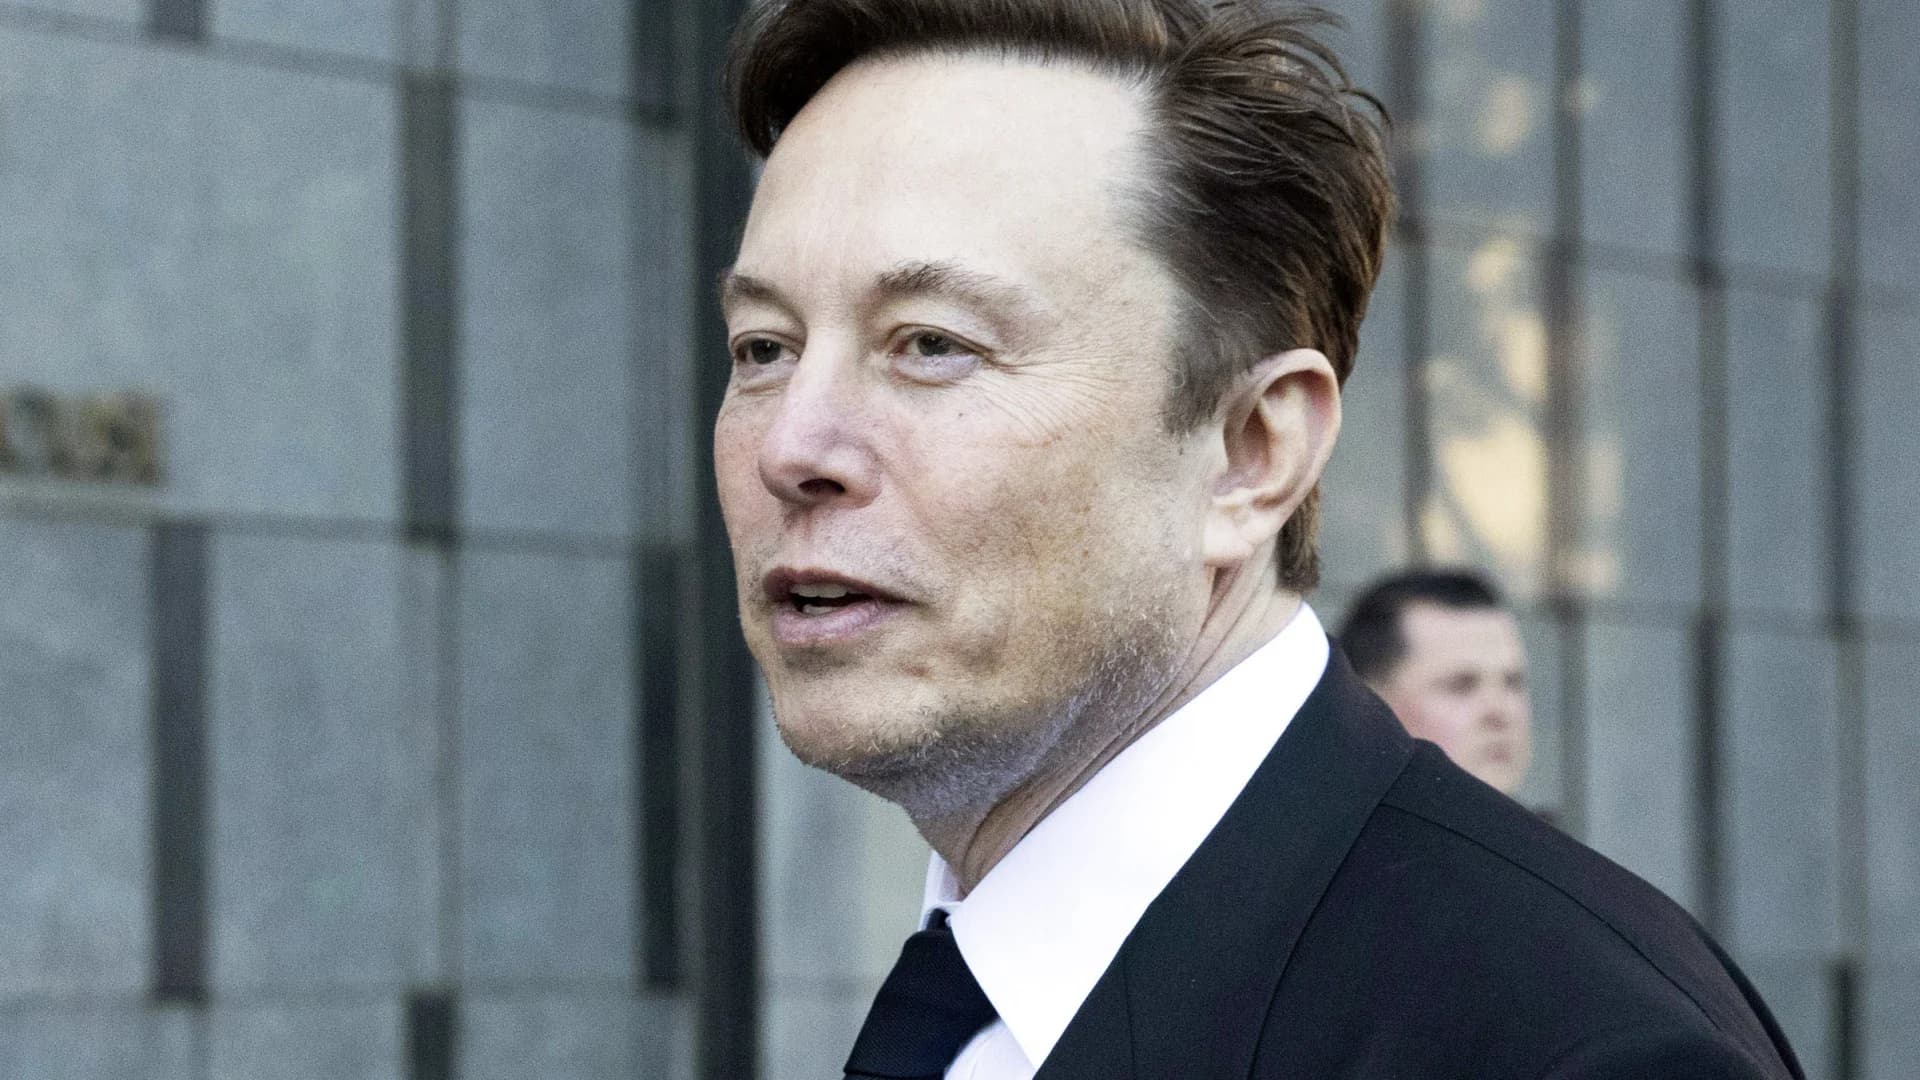 Elon Musk says he's found a new CEO for Twitter, a woman who will start in 6 weeks